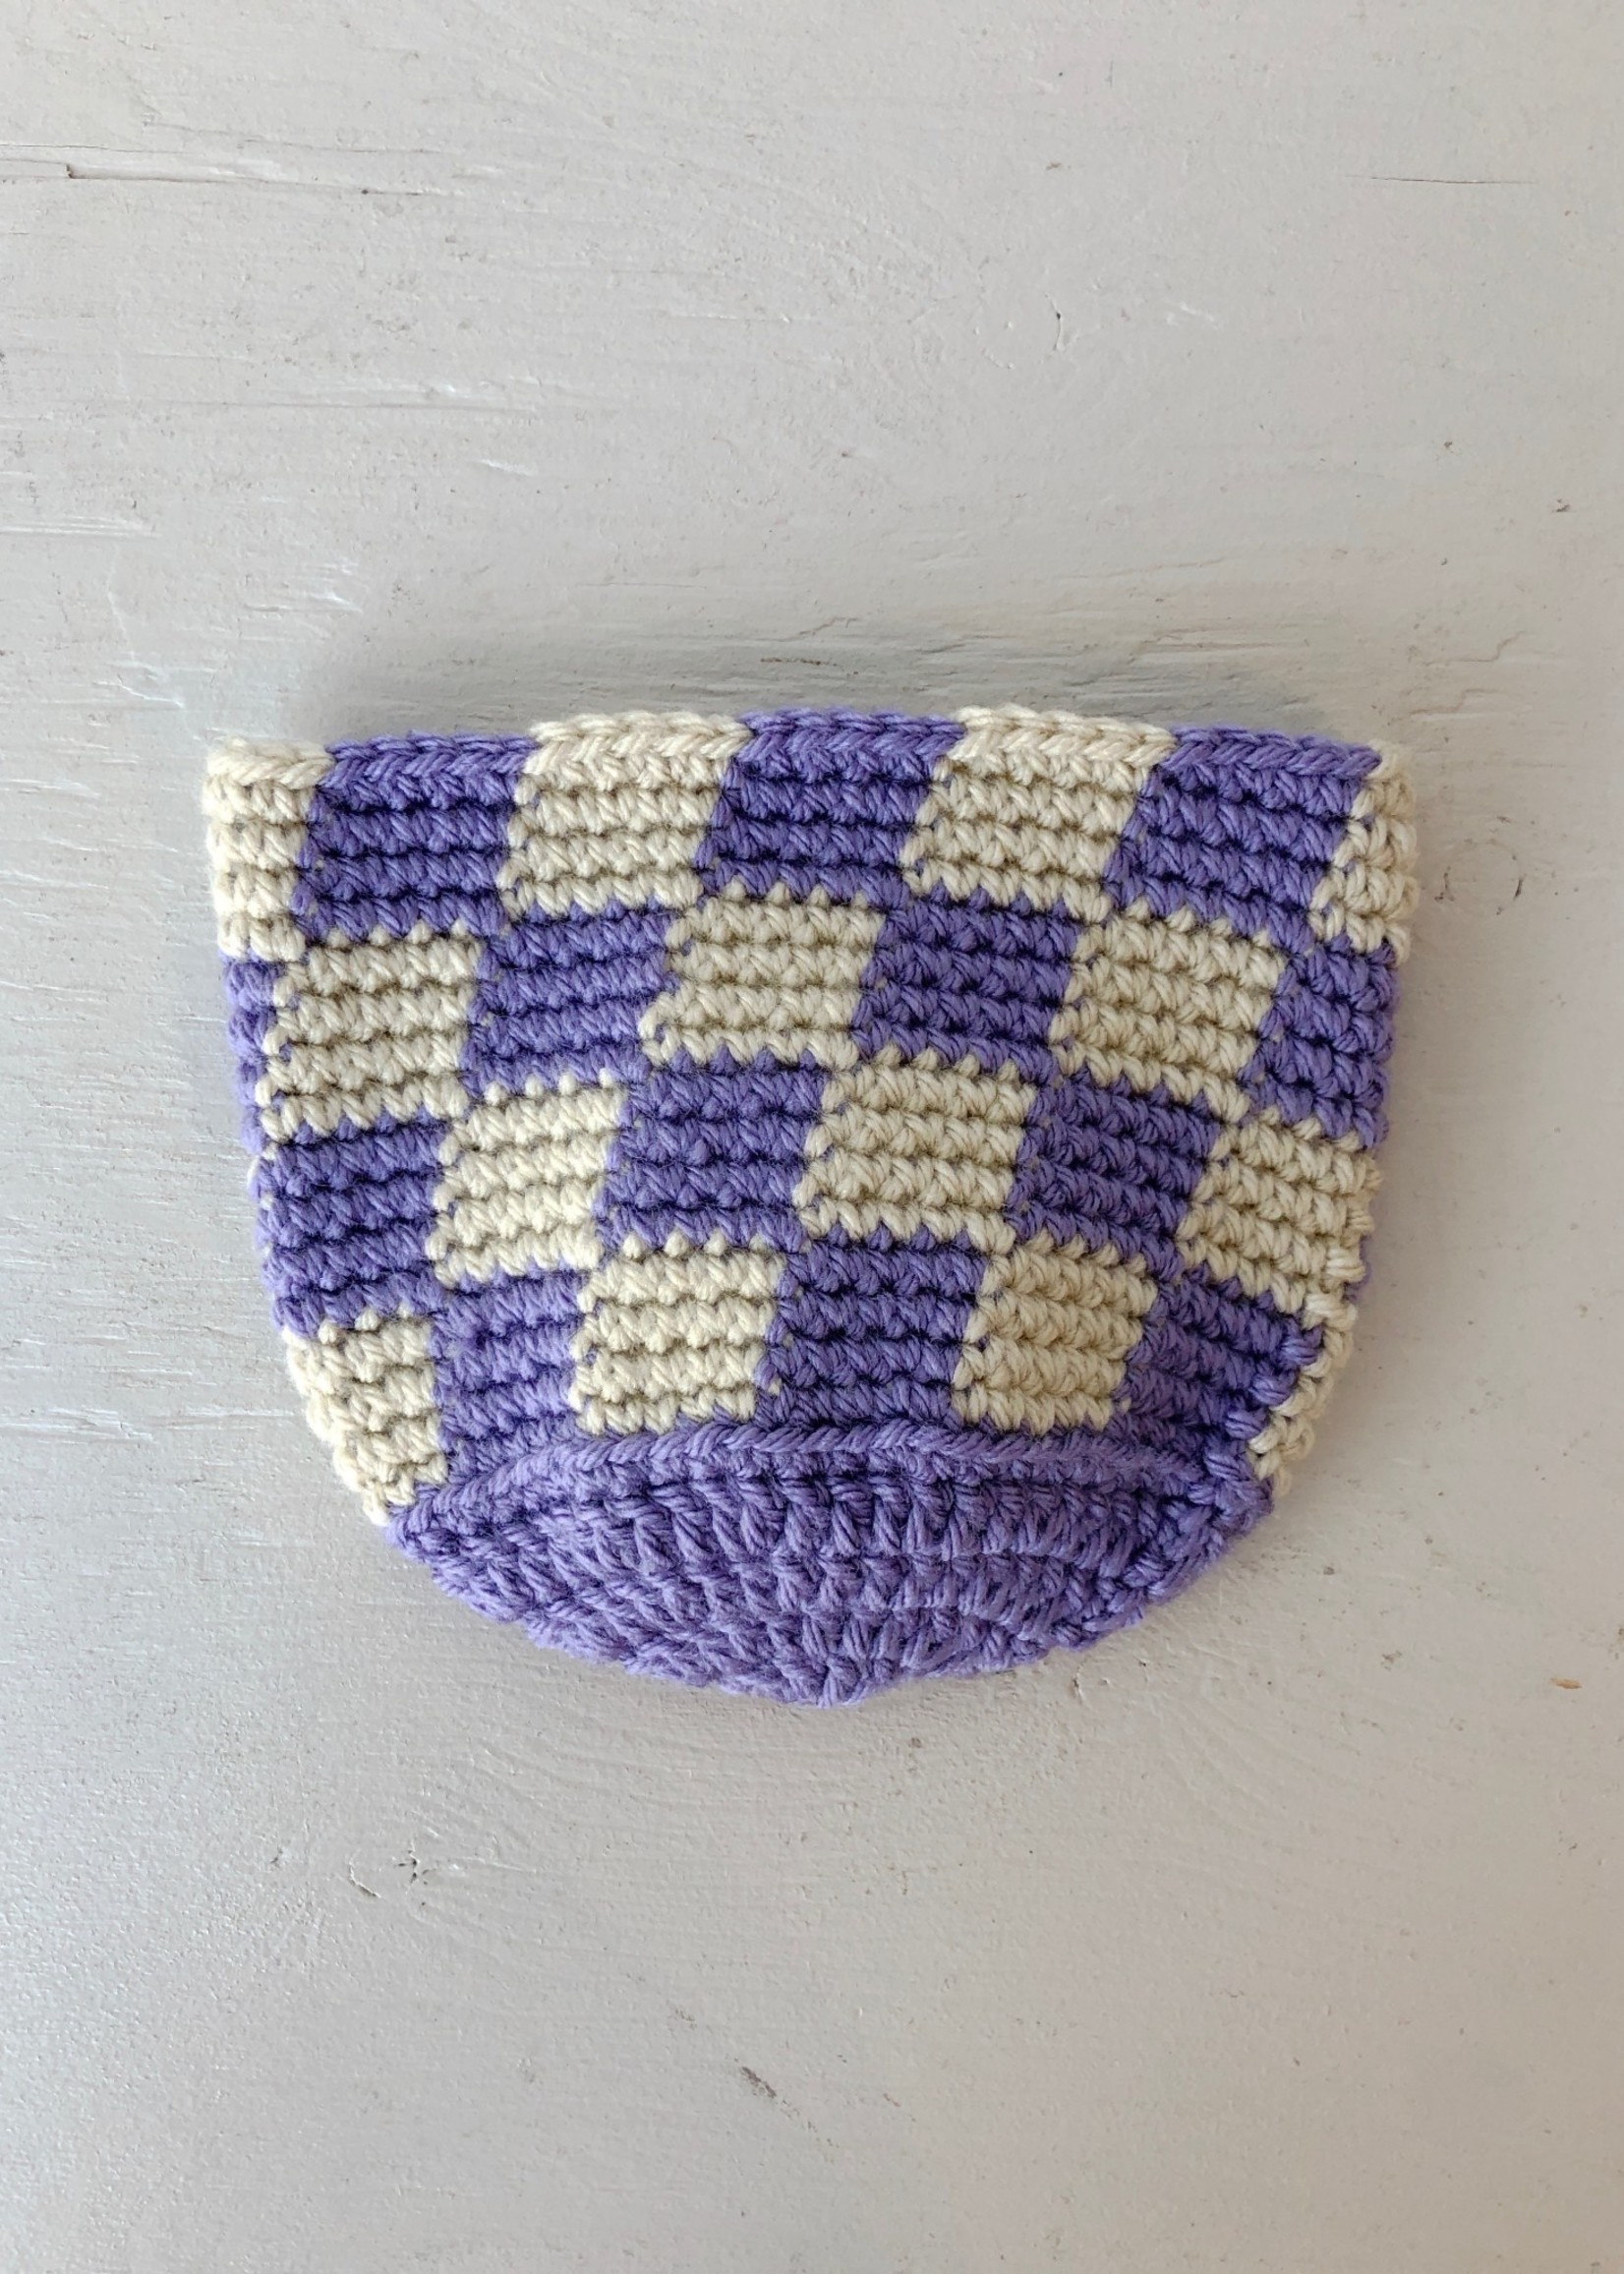 Slow May Checkered Crochet Plant Cozy by Slow May